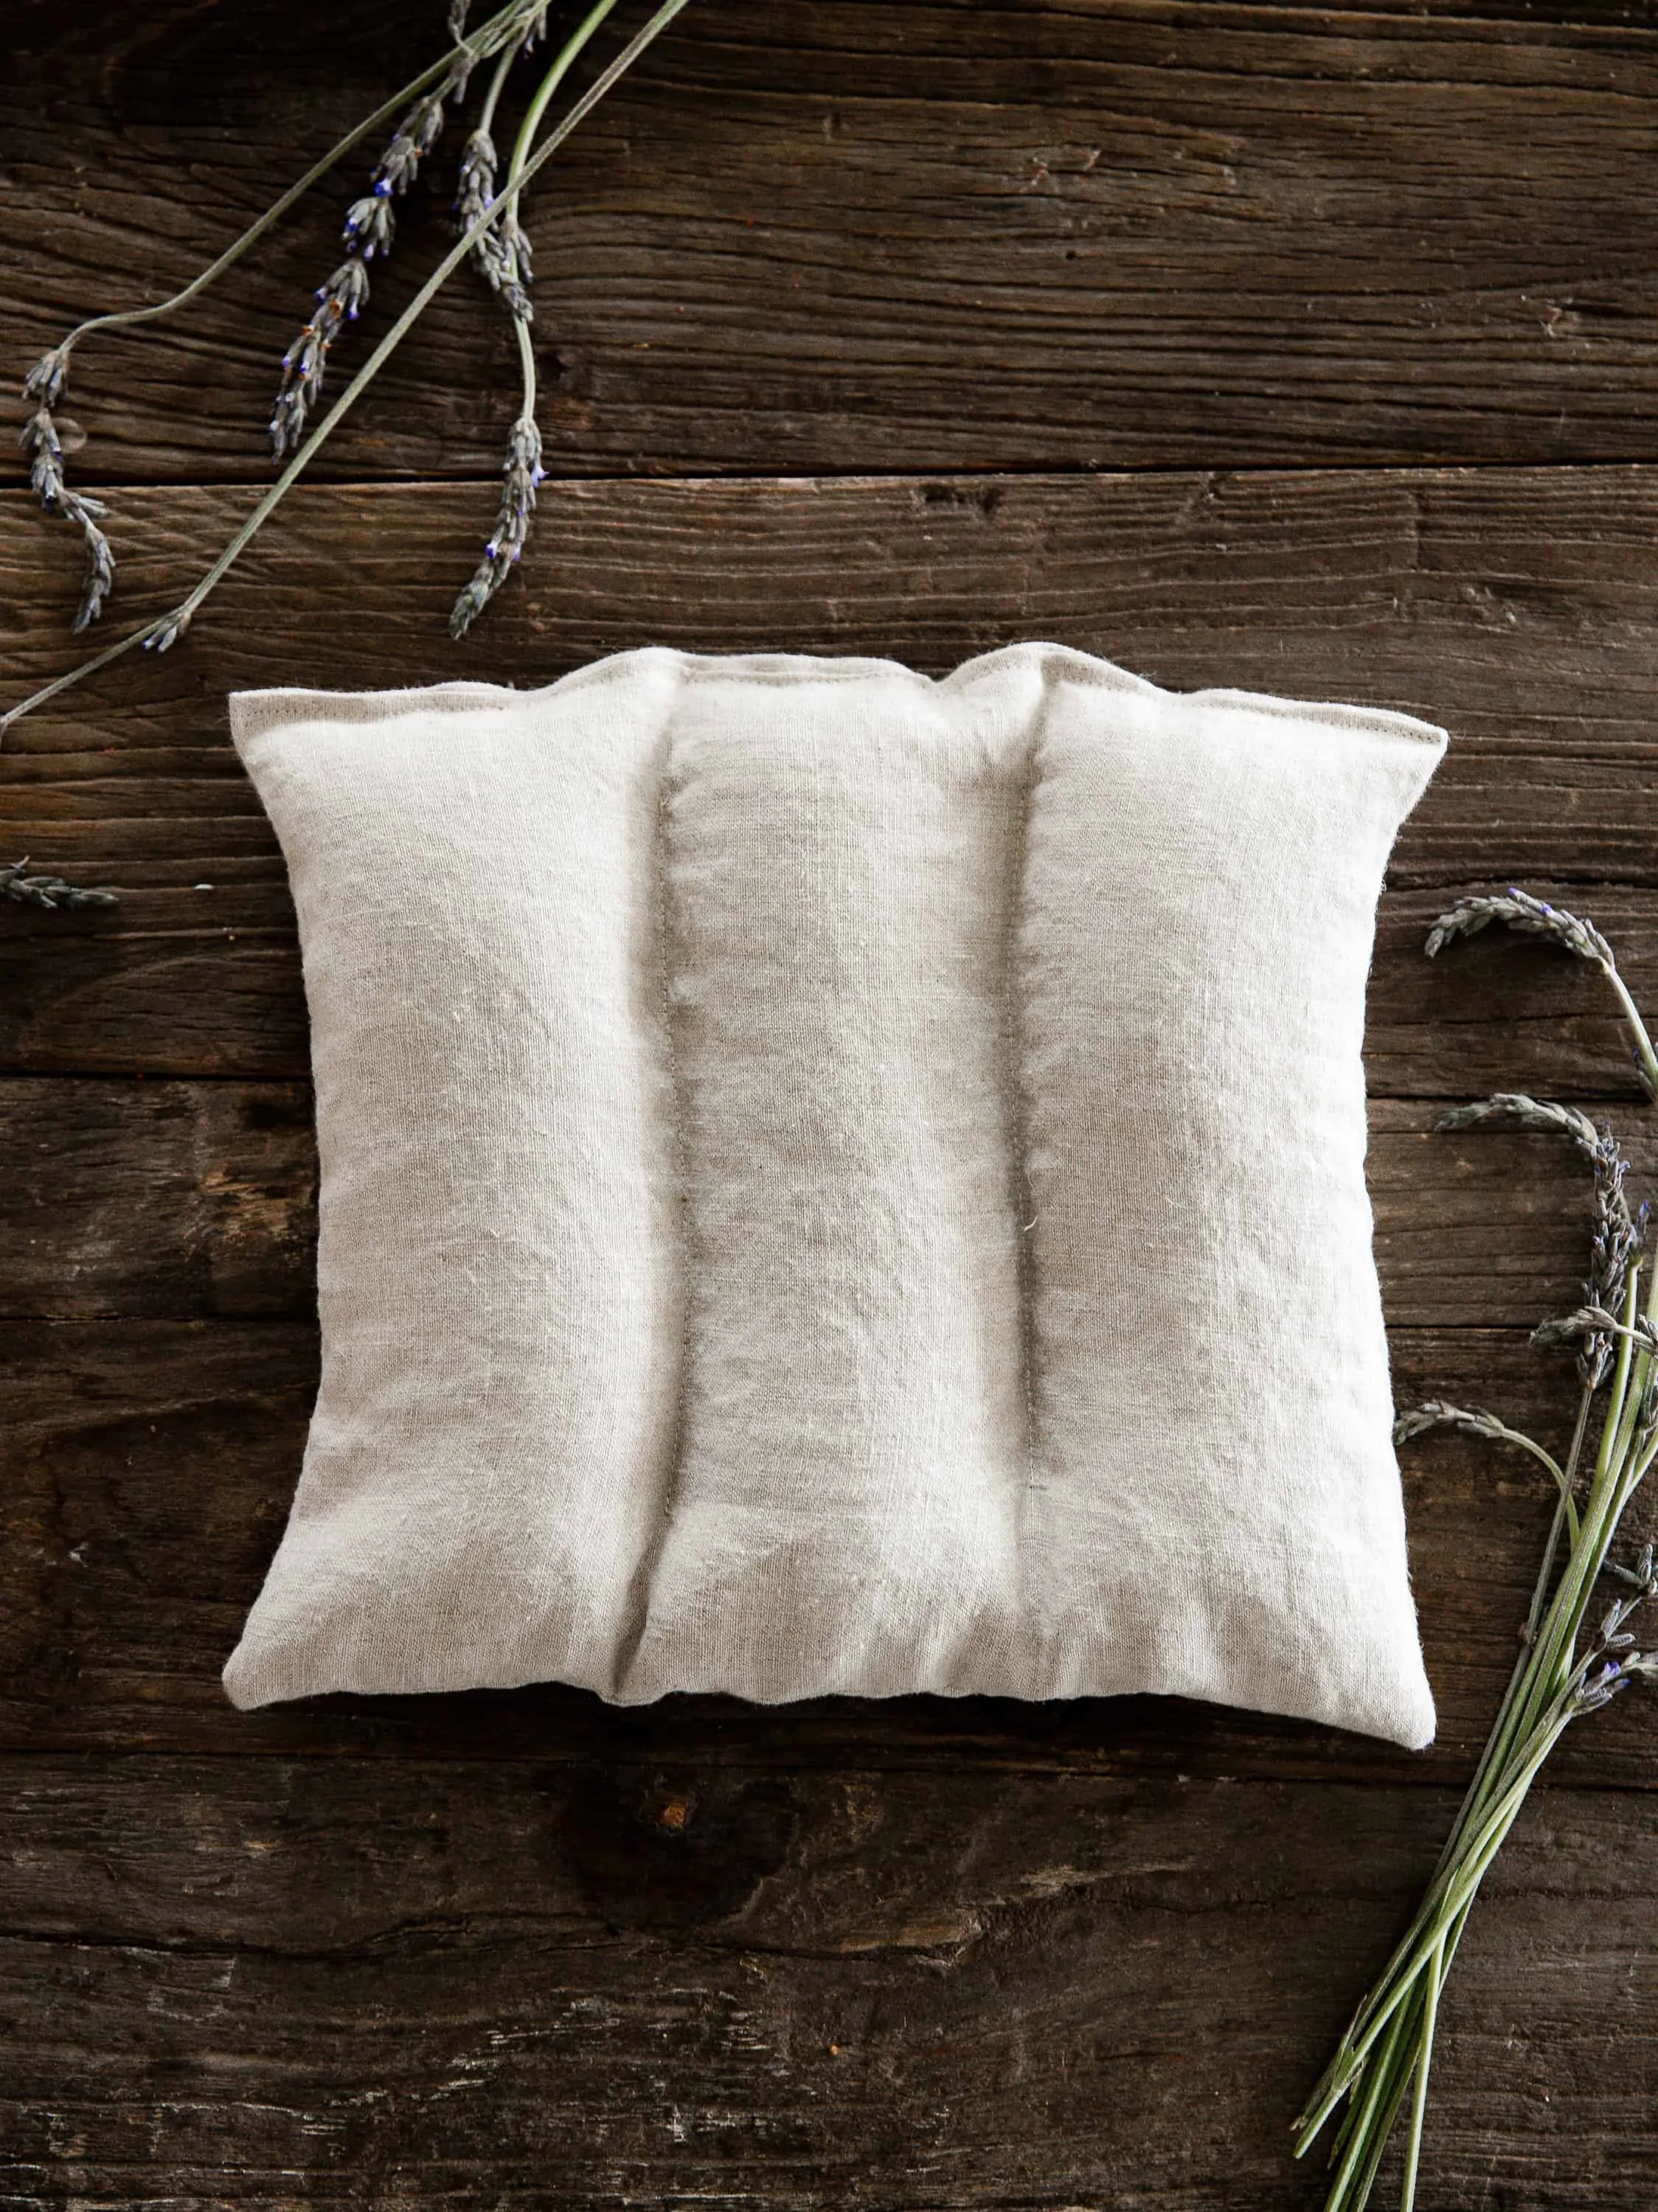 With just a little scrap fabric and some rice, you can make your own homemade rice heating pads in under 30 minutes! These pain relieving heating pads are filled with dried lavender and essential oil for the ultimate treat!